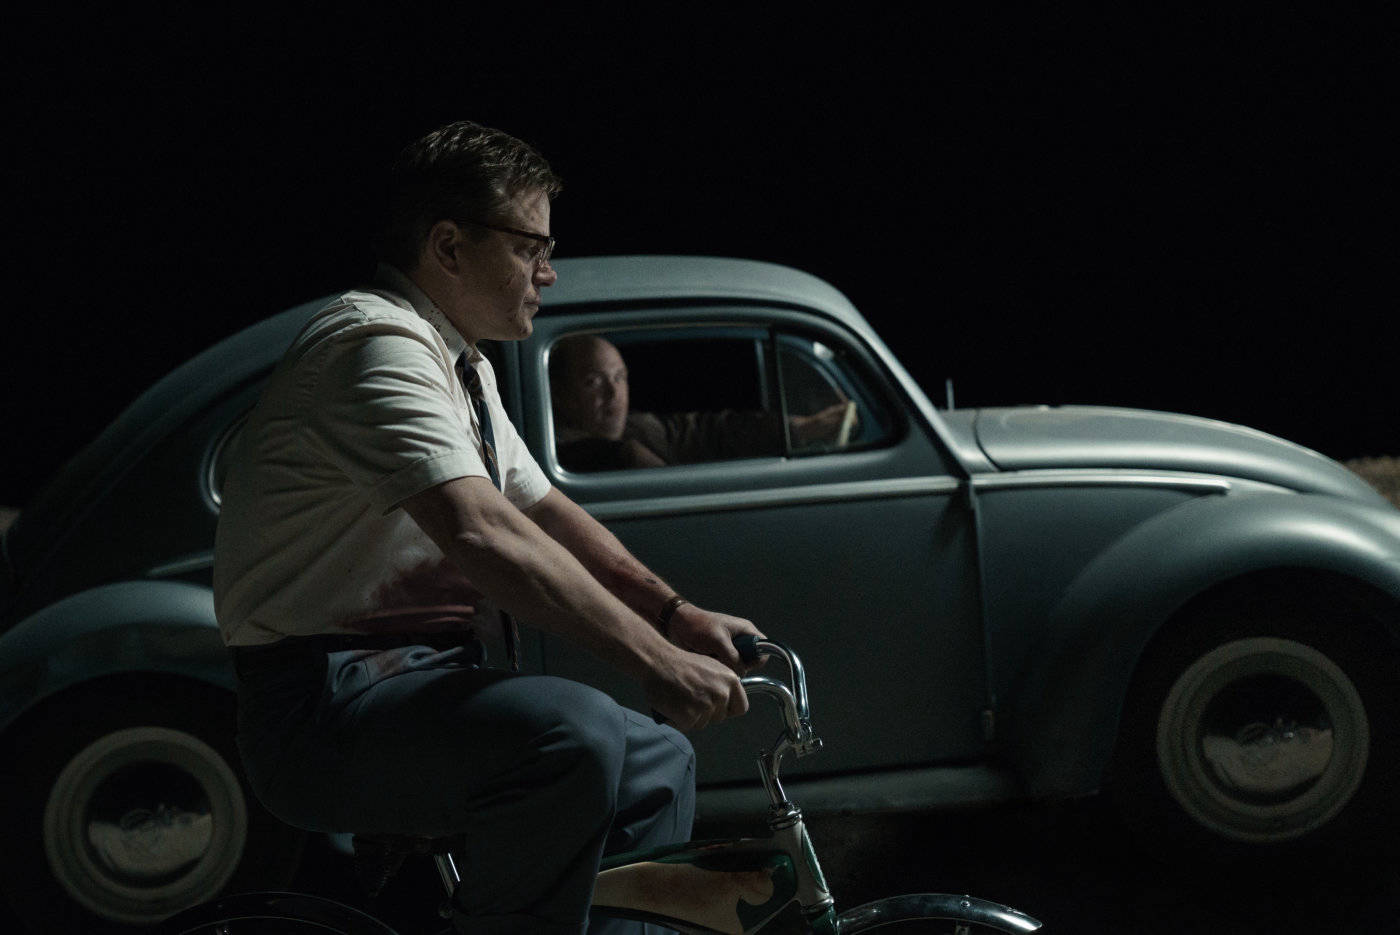 A shot from the movie Suburbicon